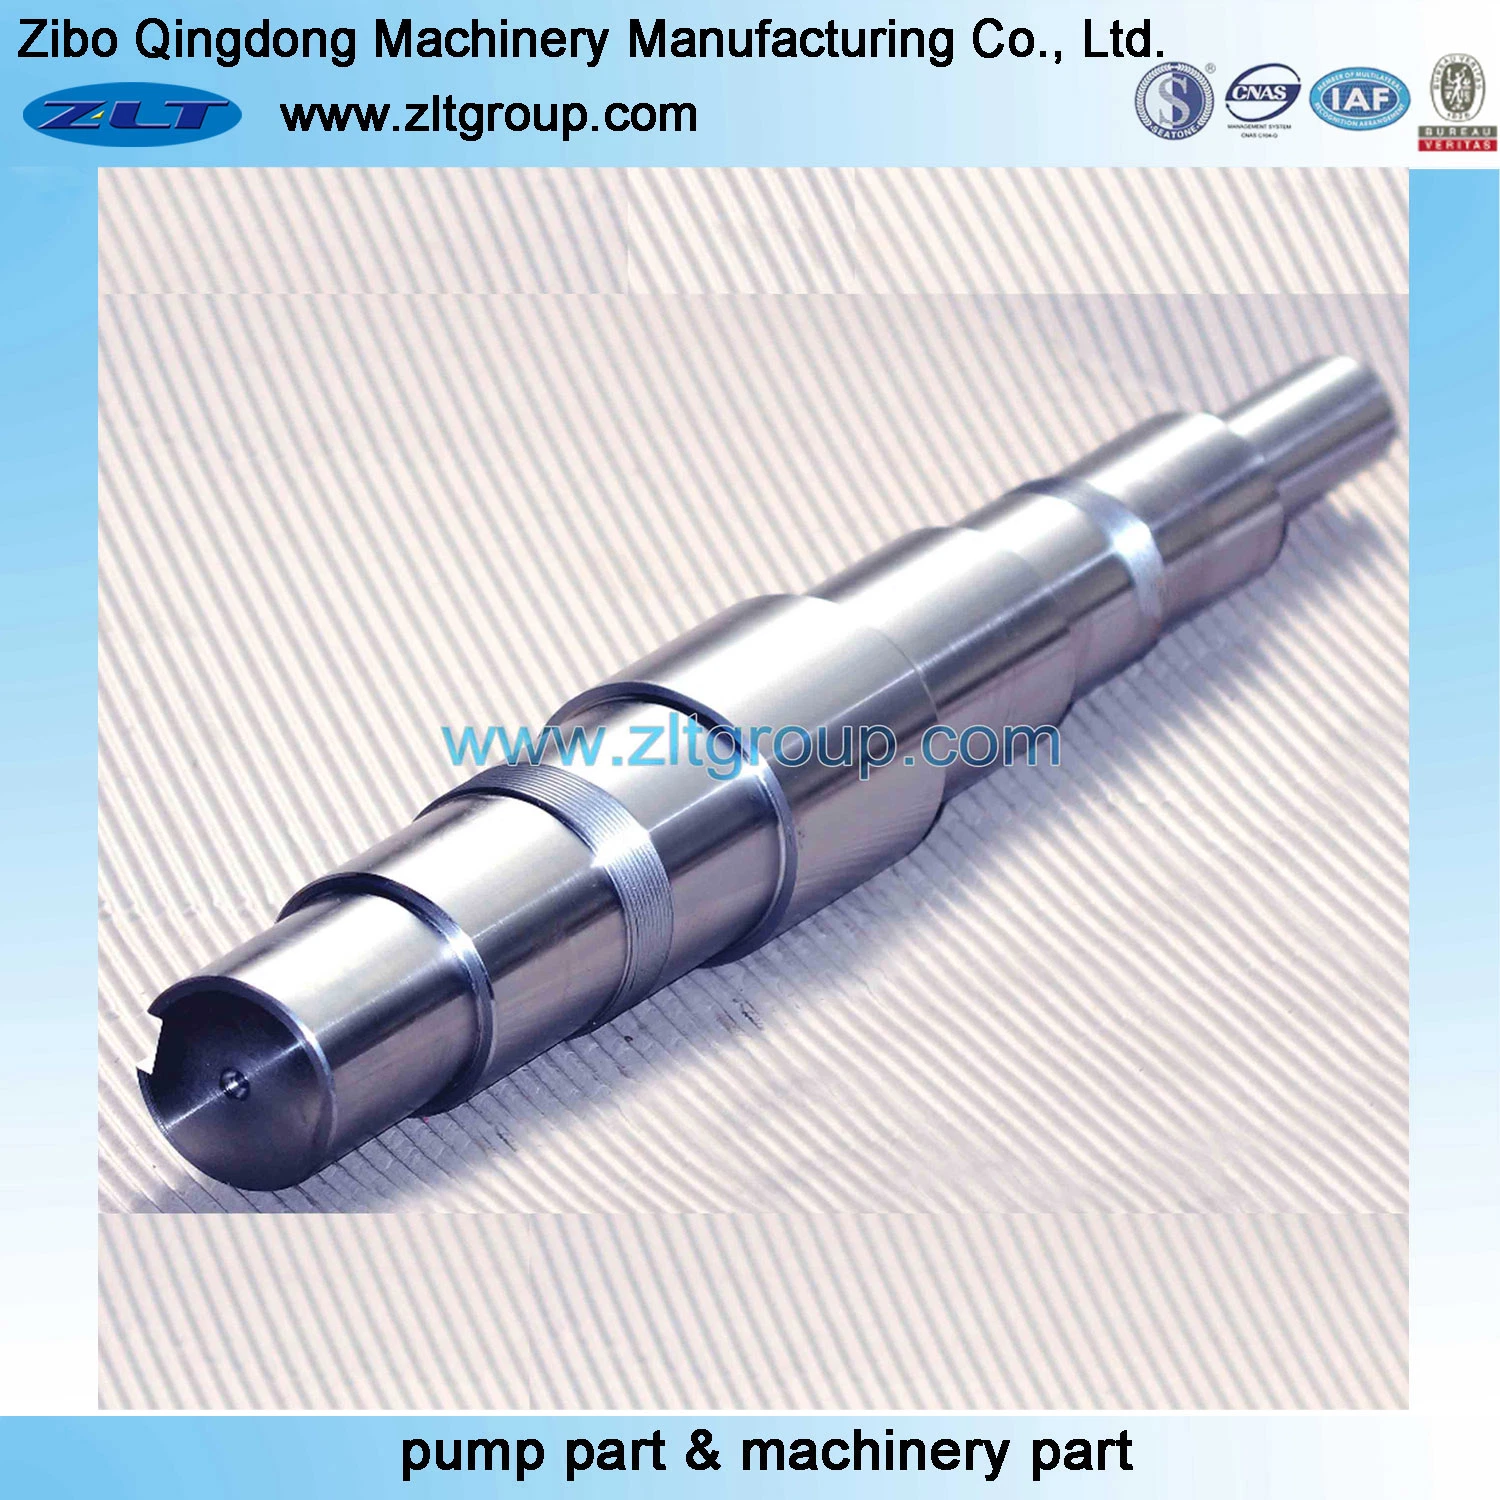 Customized OEM/ODM CNC Machining Shaft in Stainless Steel 316/CD4/304 Used in Machinery Industry